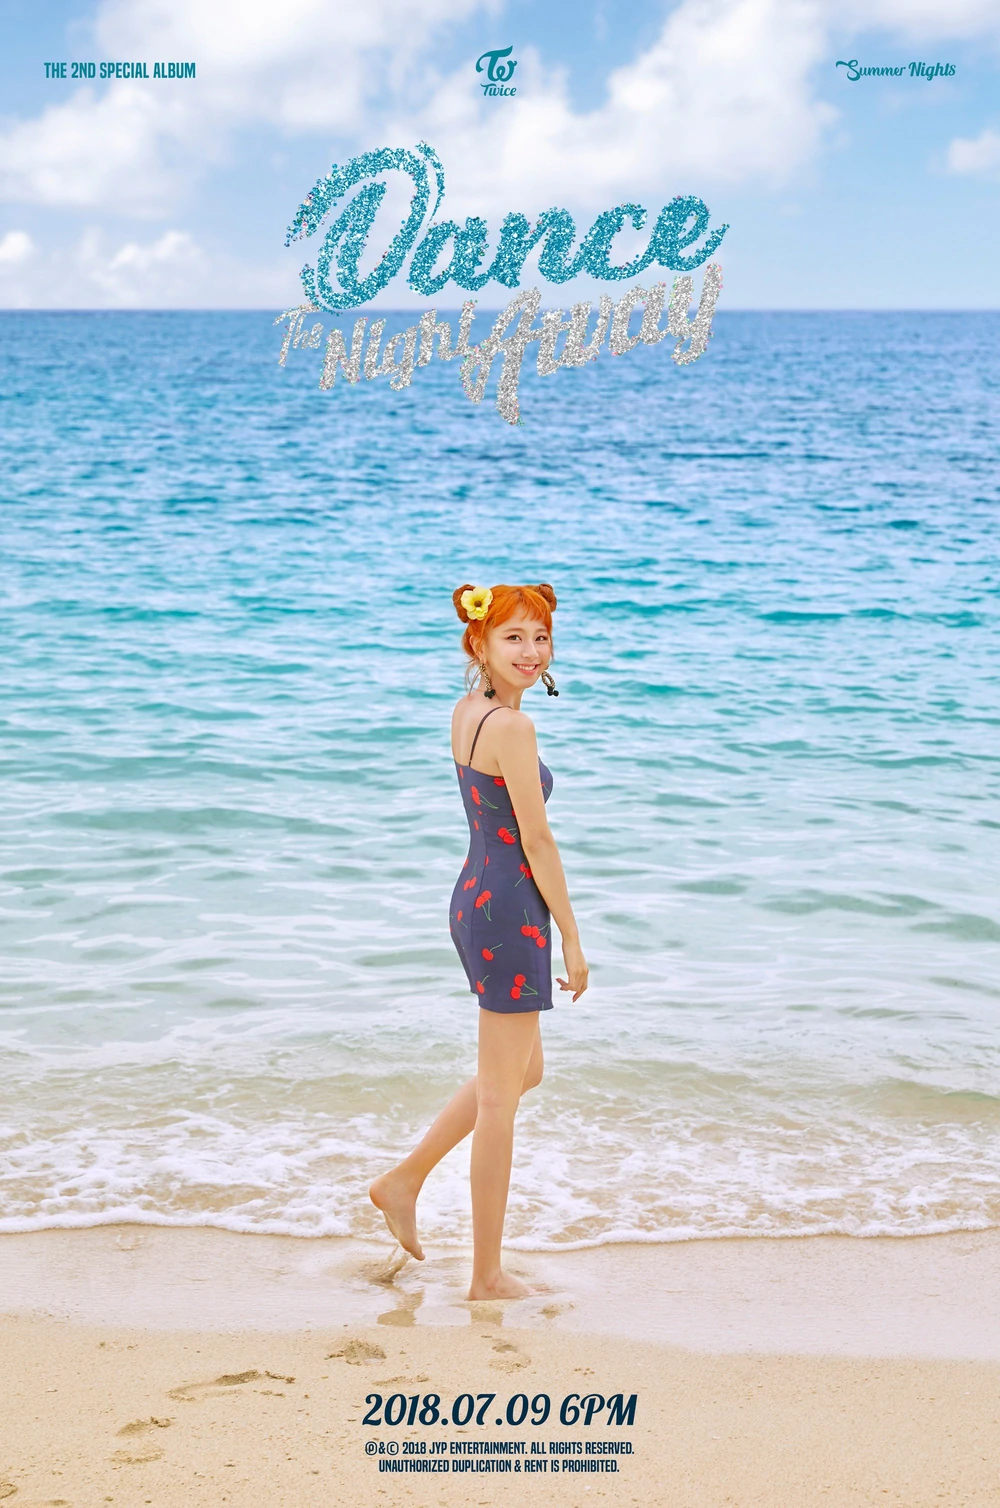 Twice Summer Nights Chaeyoung Concept Teaser Picture Image Photo Kpop K-Concept 4